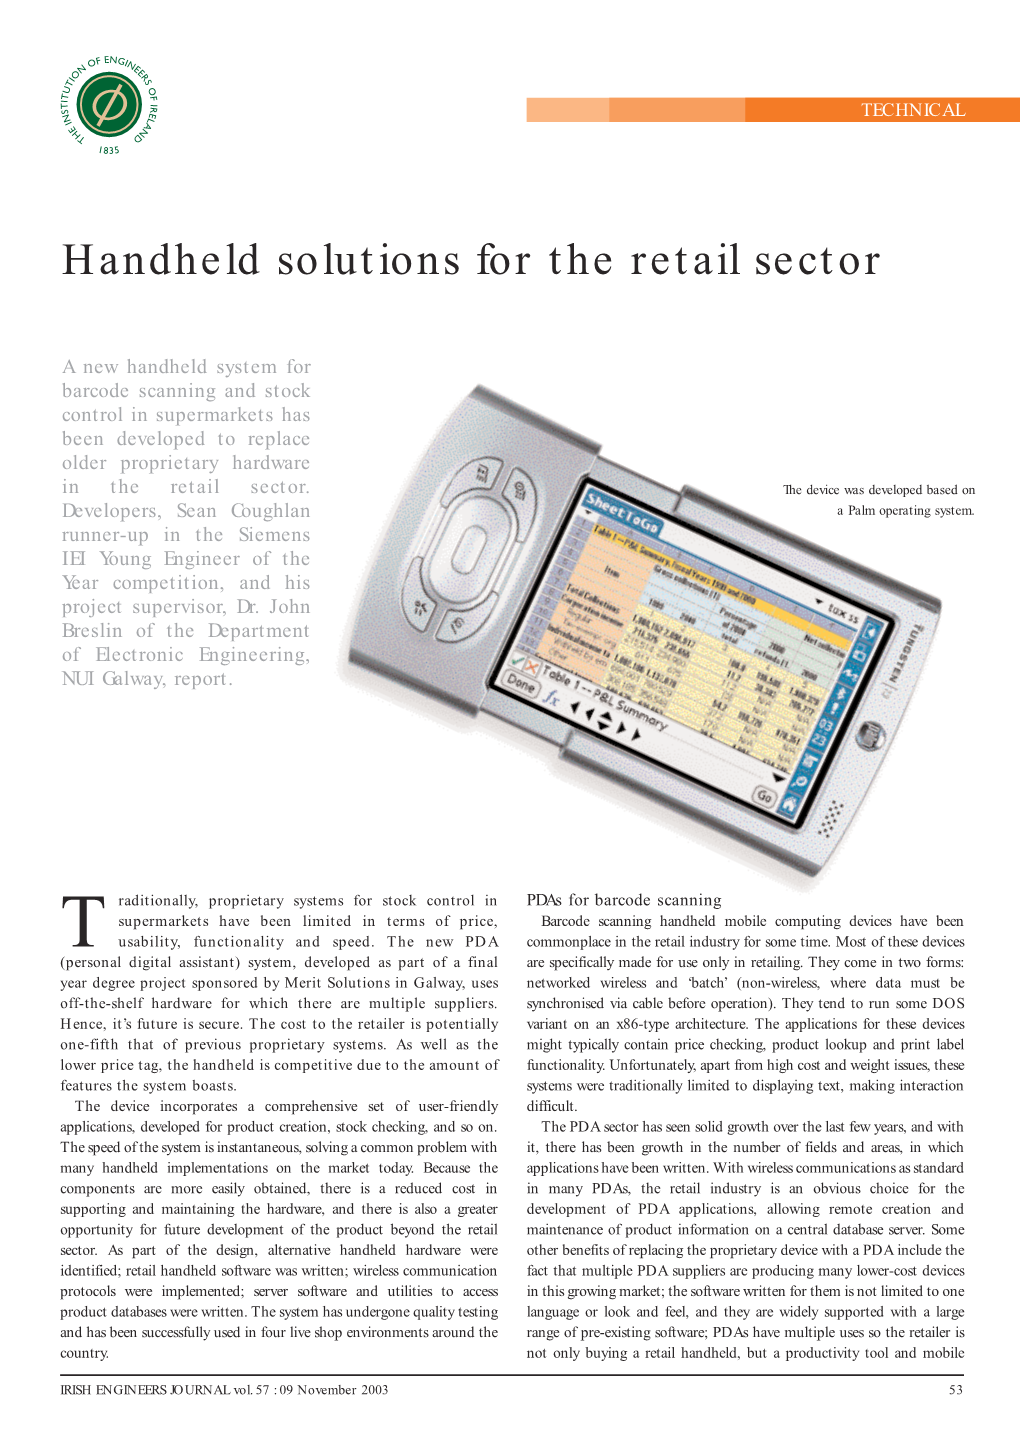 Handheld Solutions for the Retail Sector